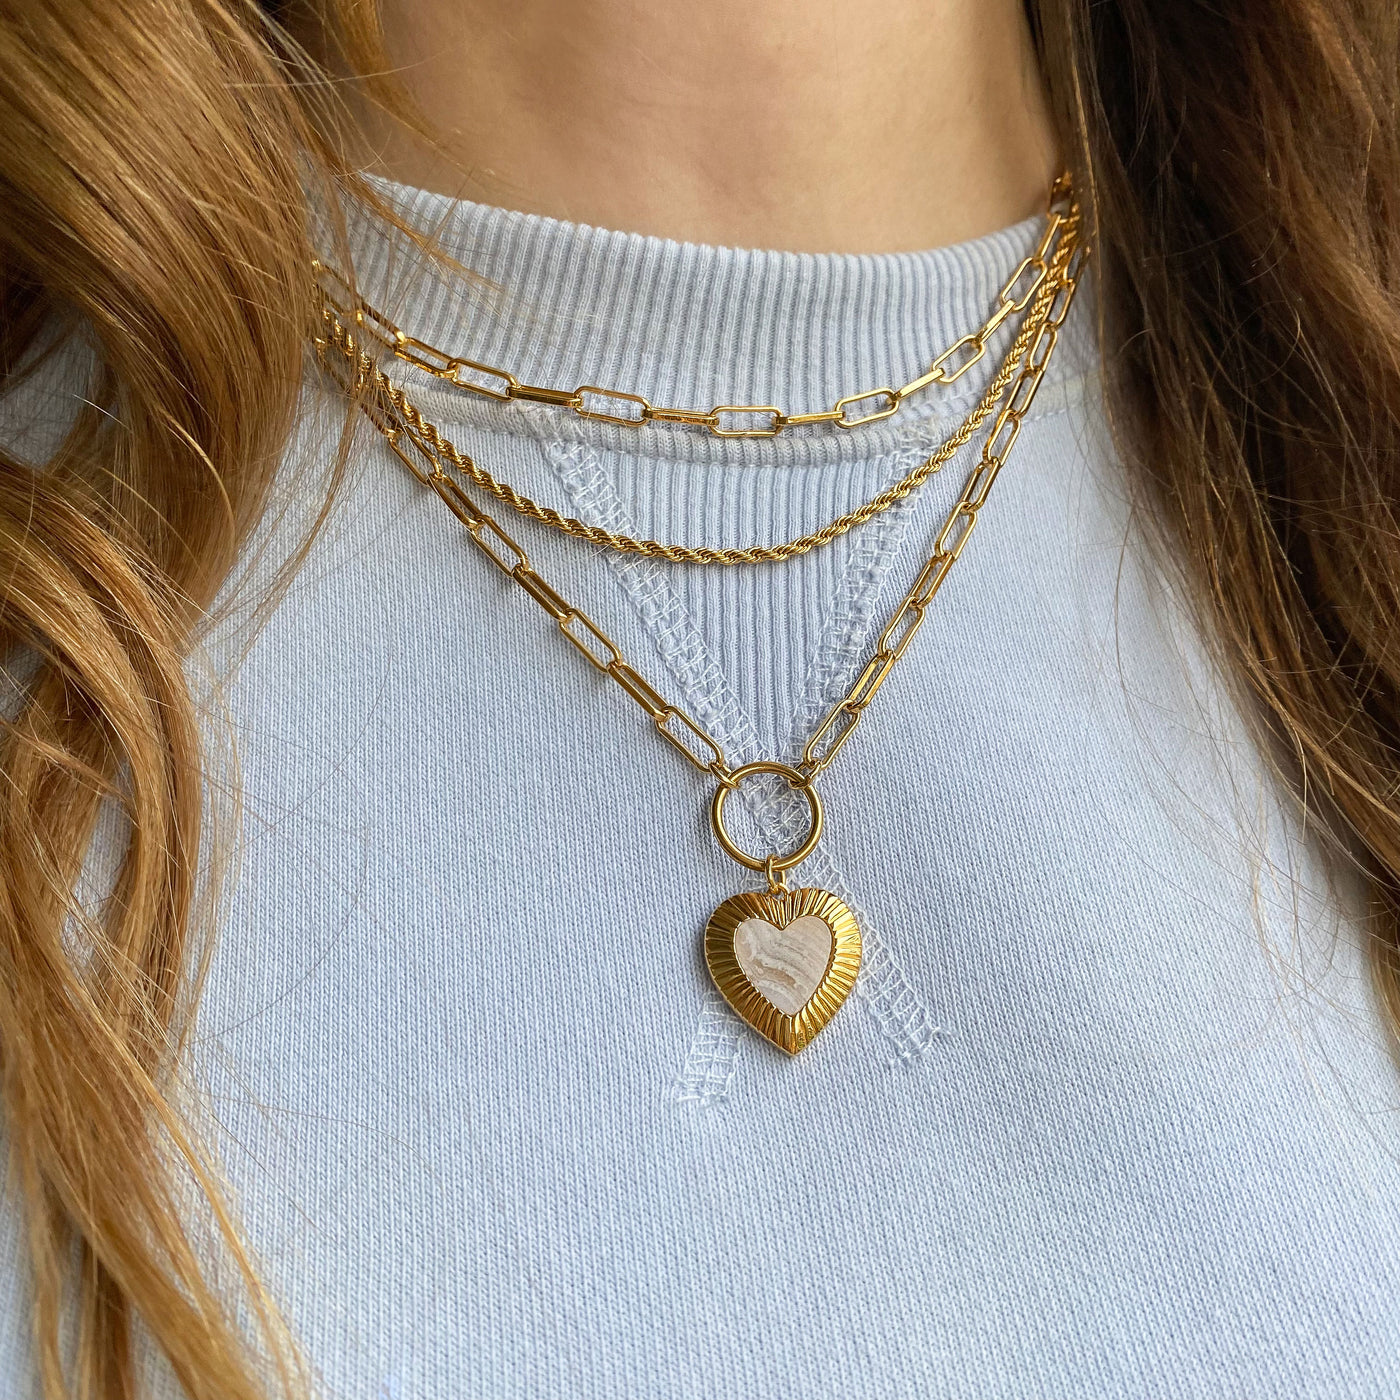 Simple gold twist chain necklace, gold chunky chain necklace, gold chunky chain necklace with blue lace agate heart charm